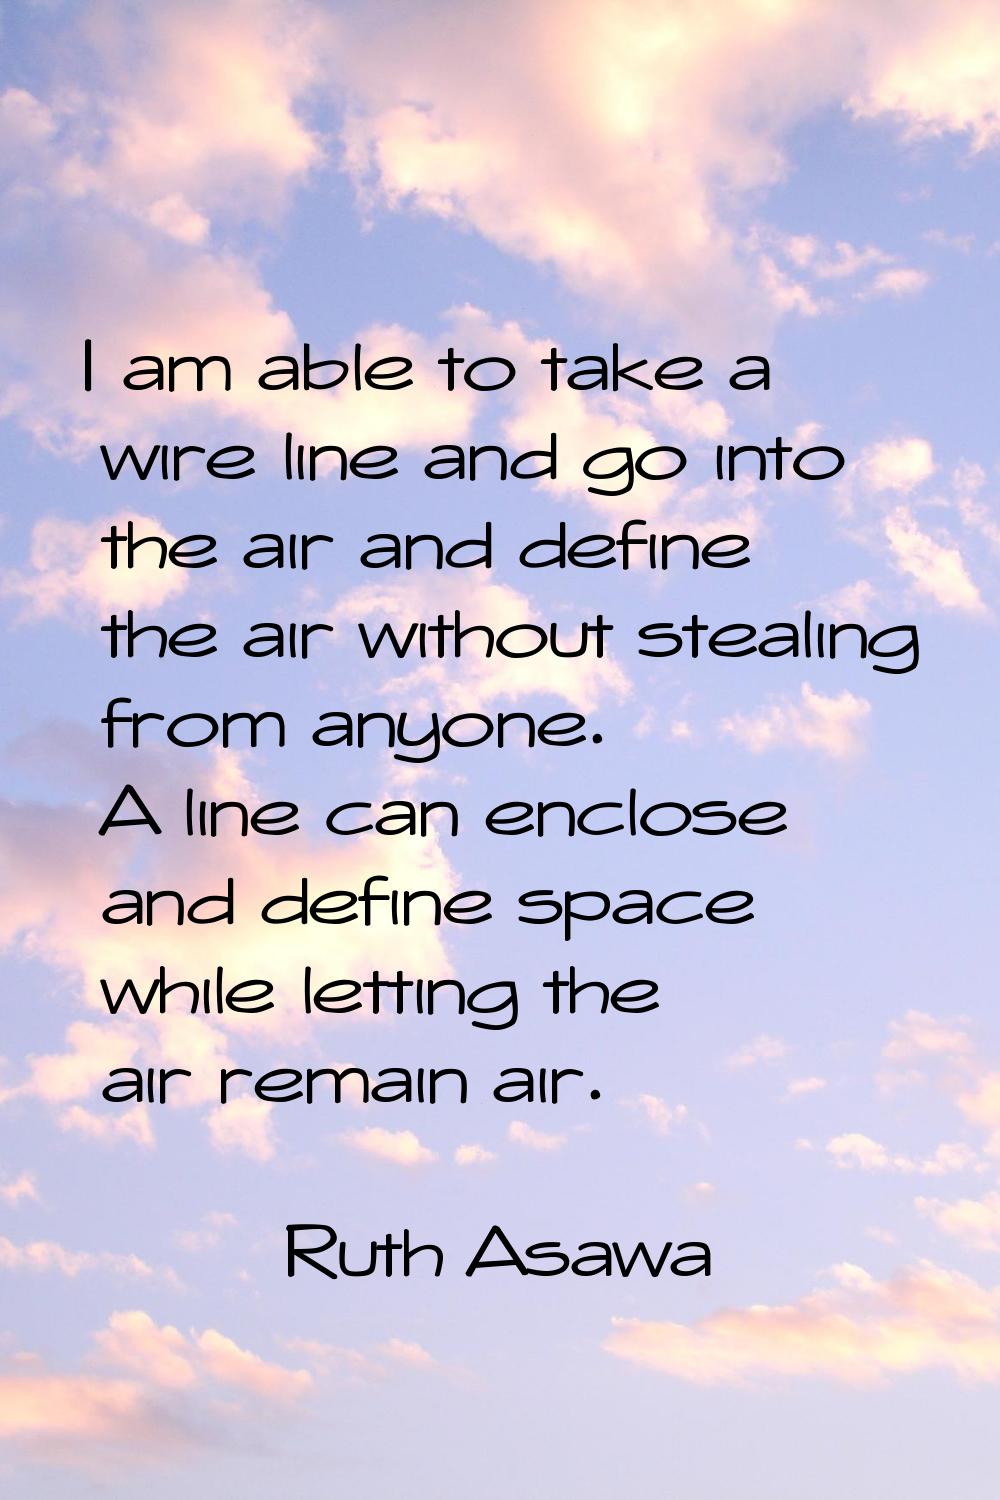 I am able to take a wire line and go into the air and define the air without stealing from anyone. 